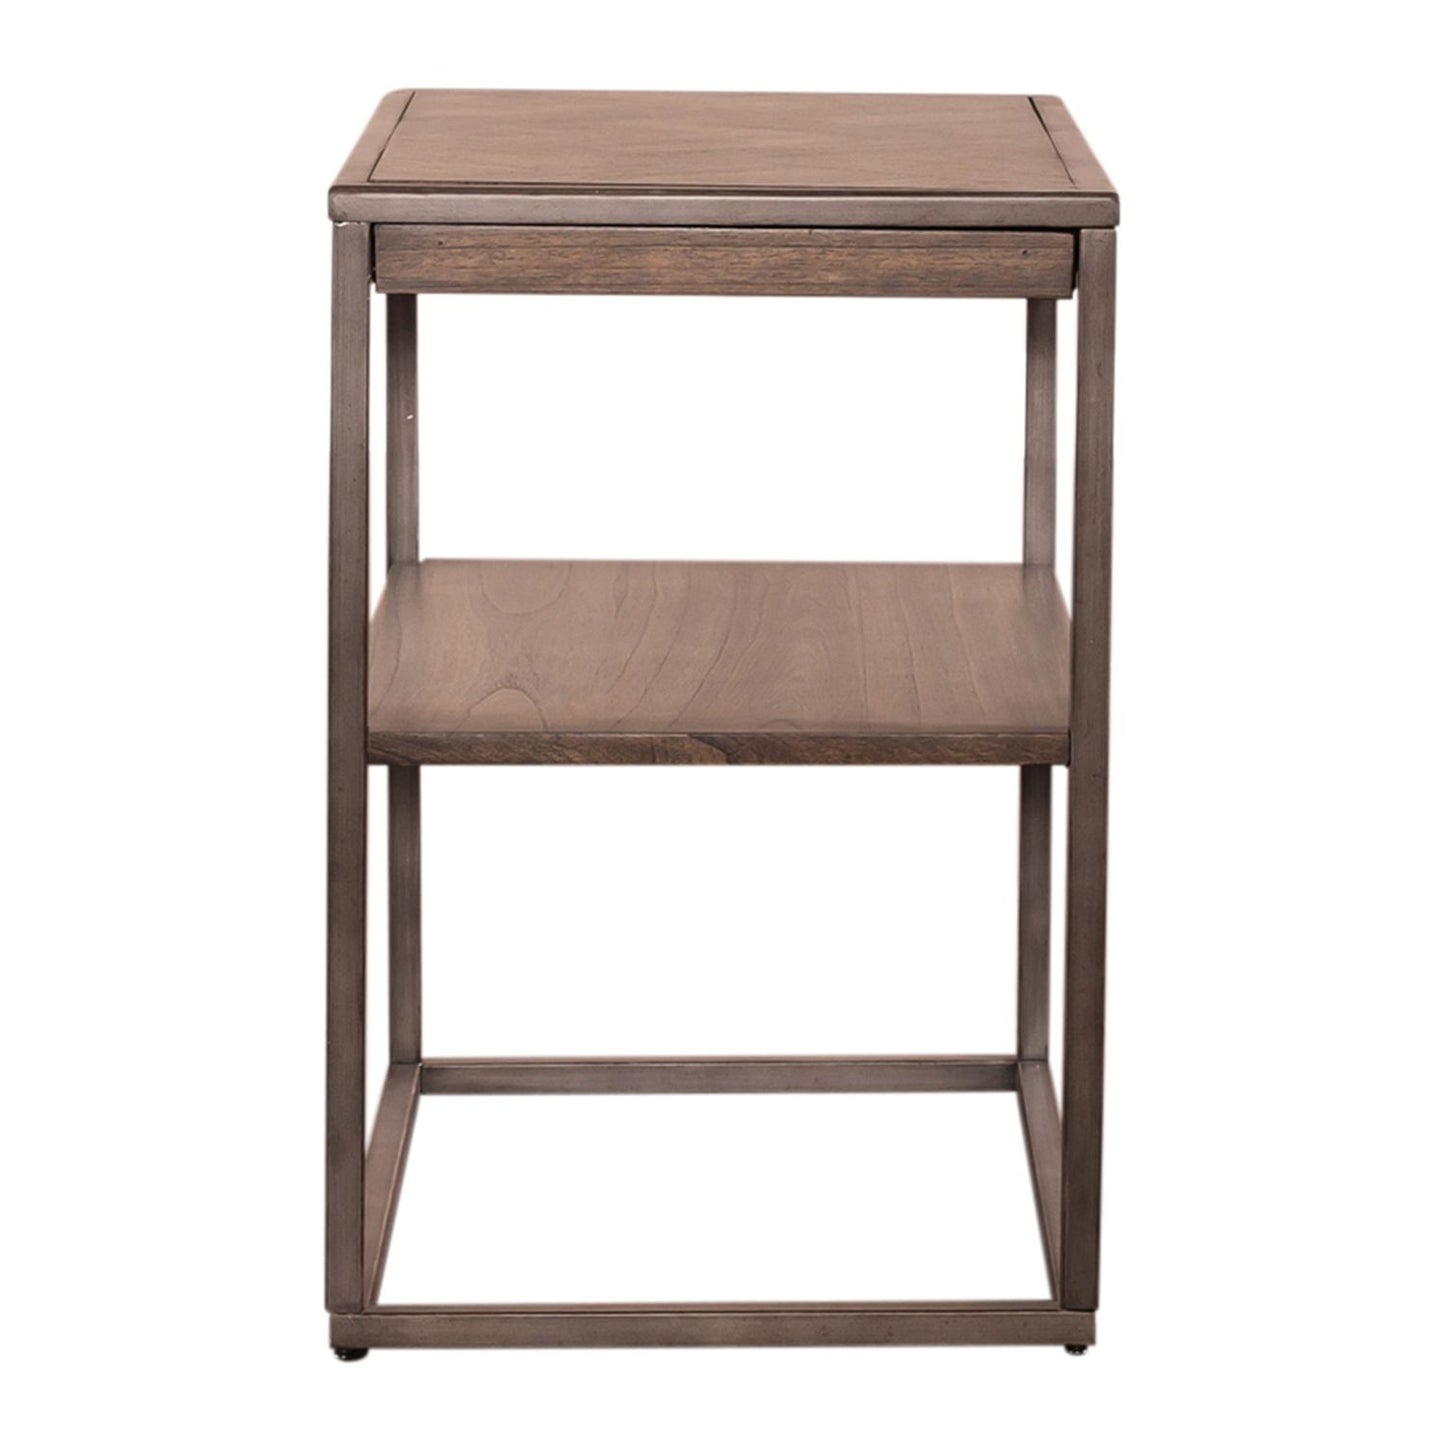 Jamestown - Chair Side Table